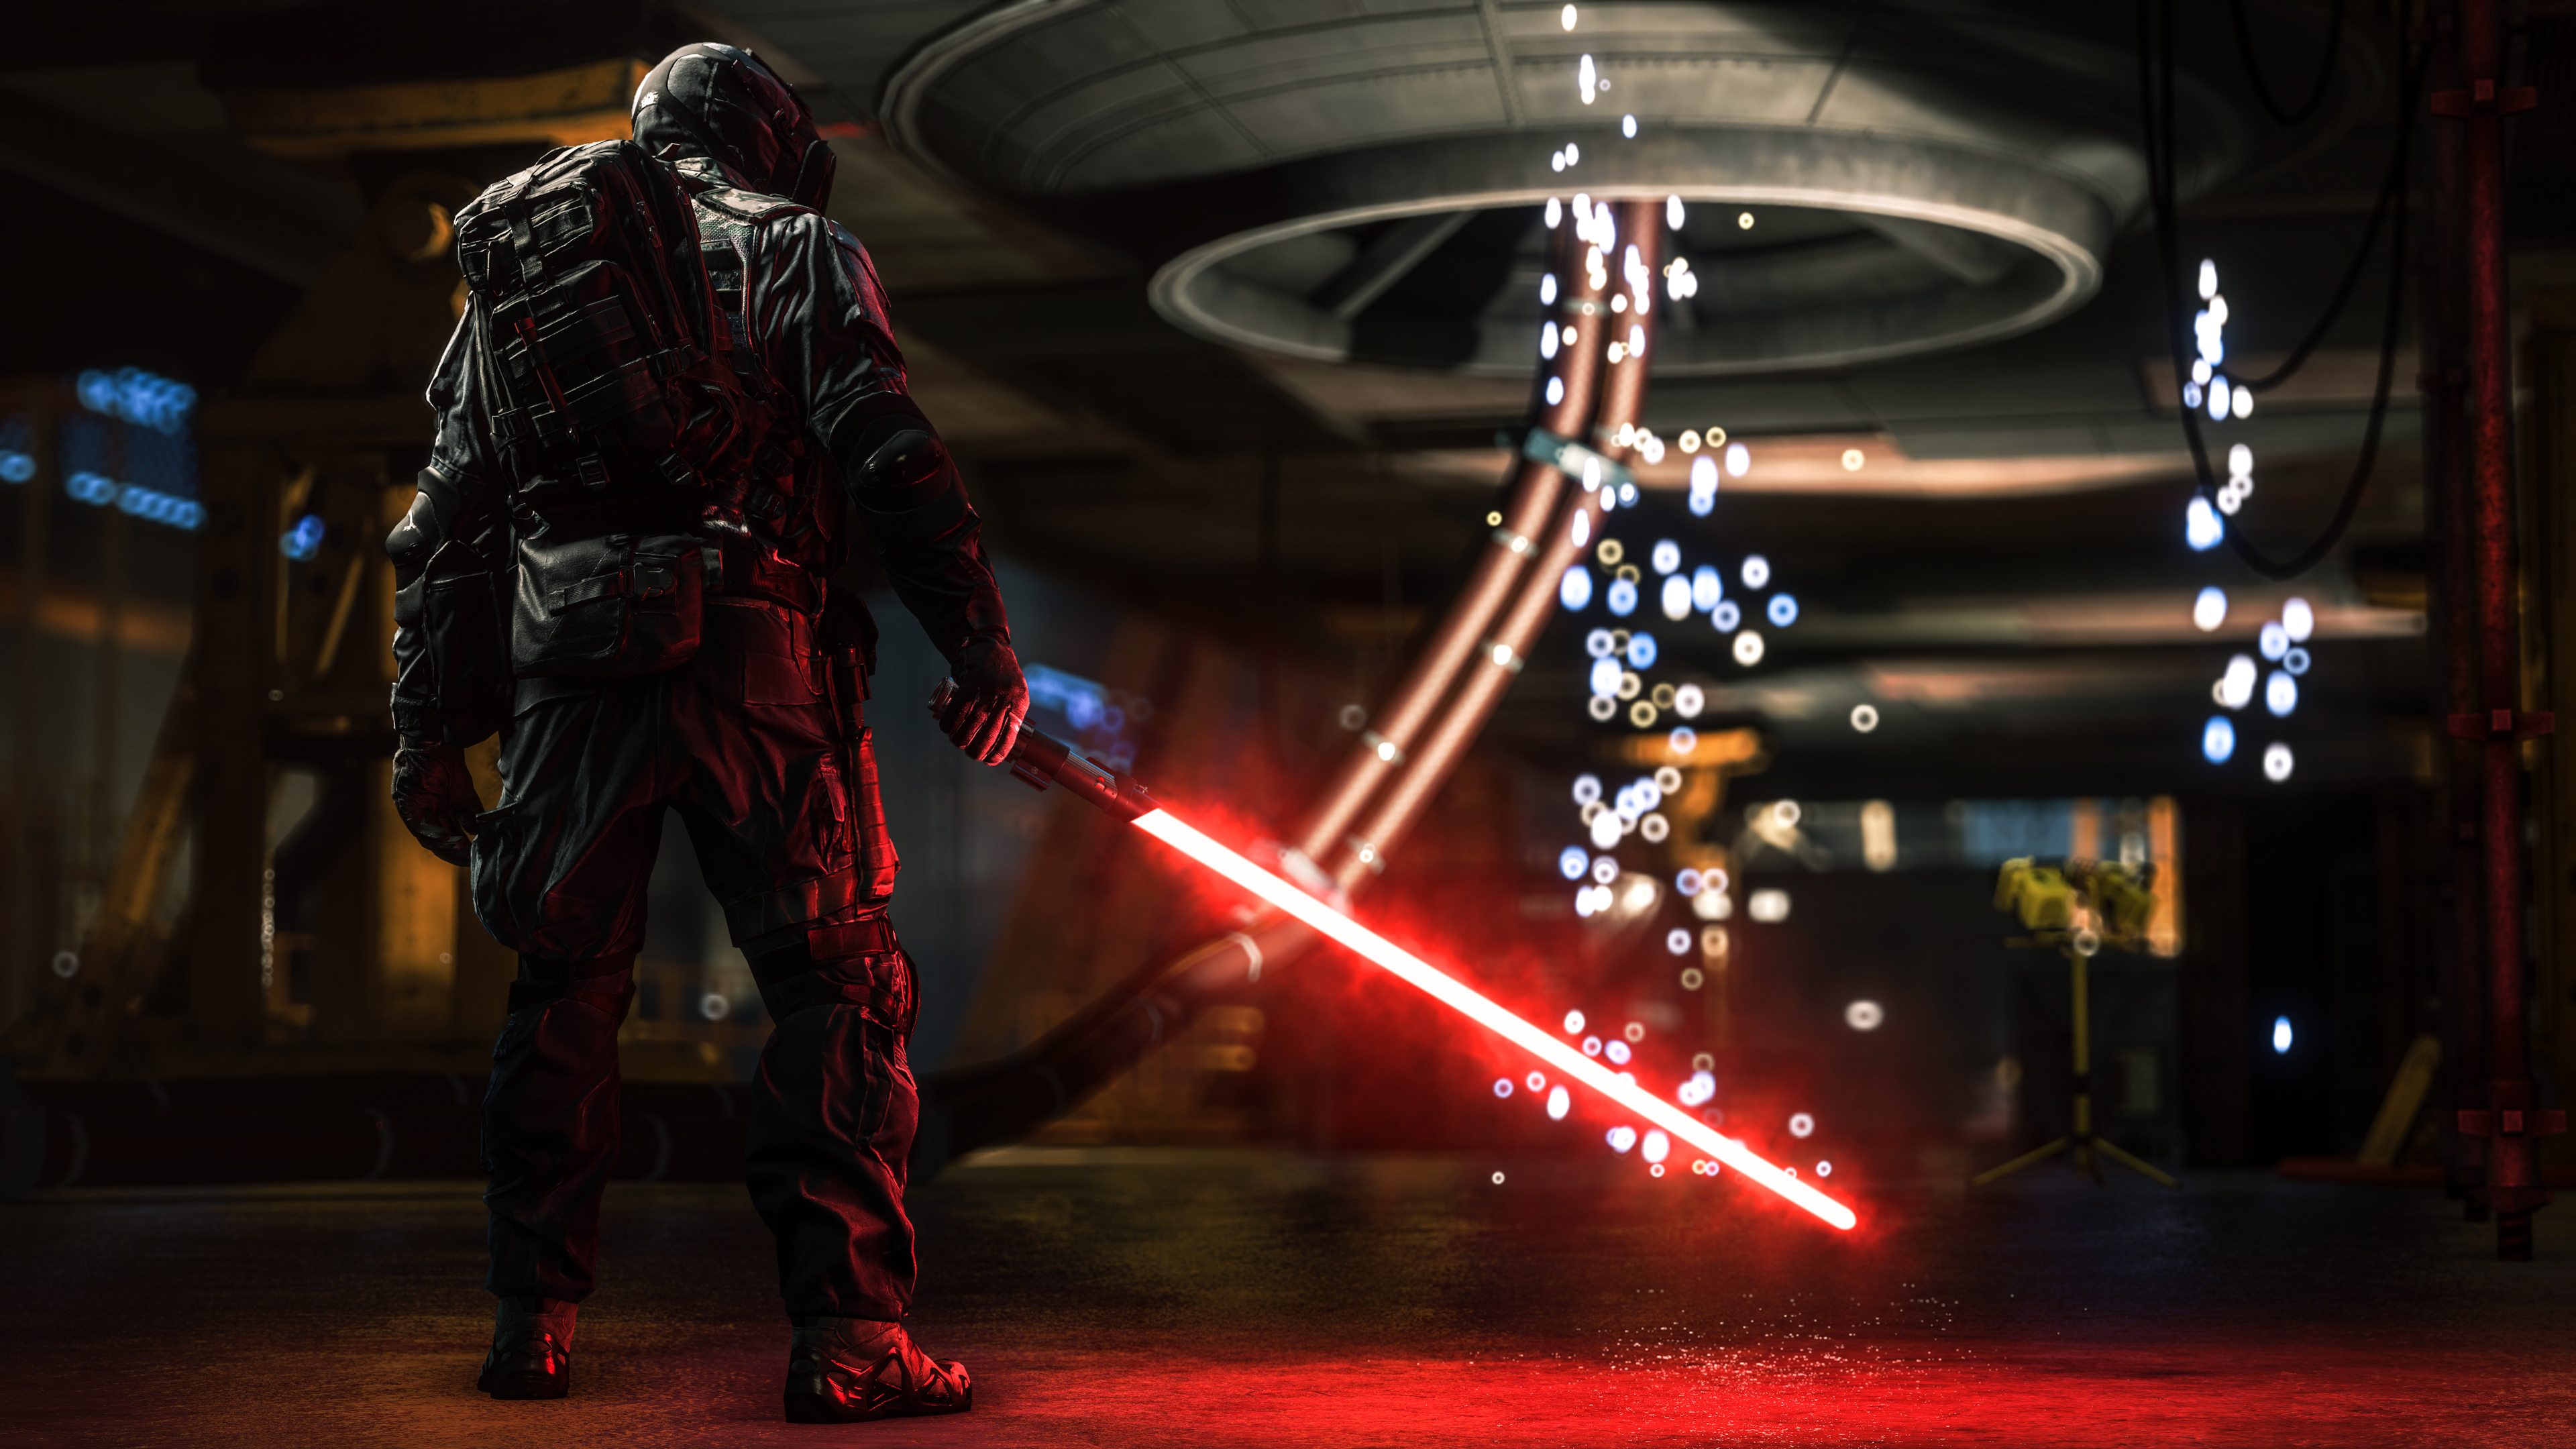 star wars sith wallpaper,fictional character,darkness,pc game,digital compositing,action adventure game